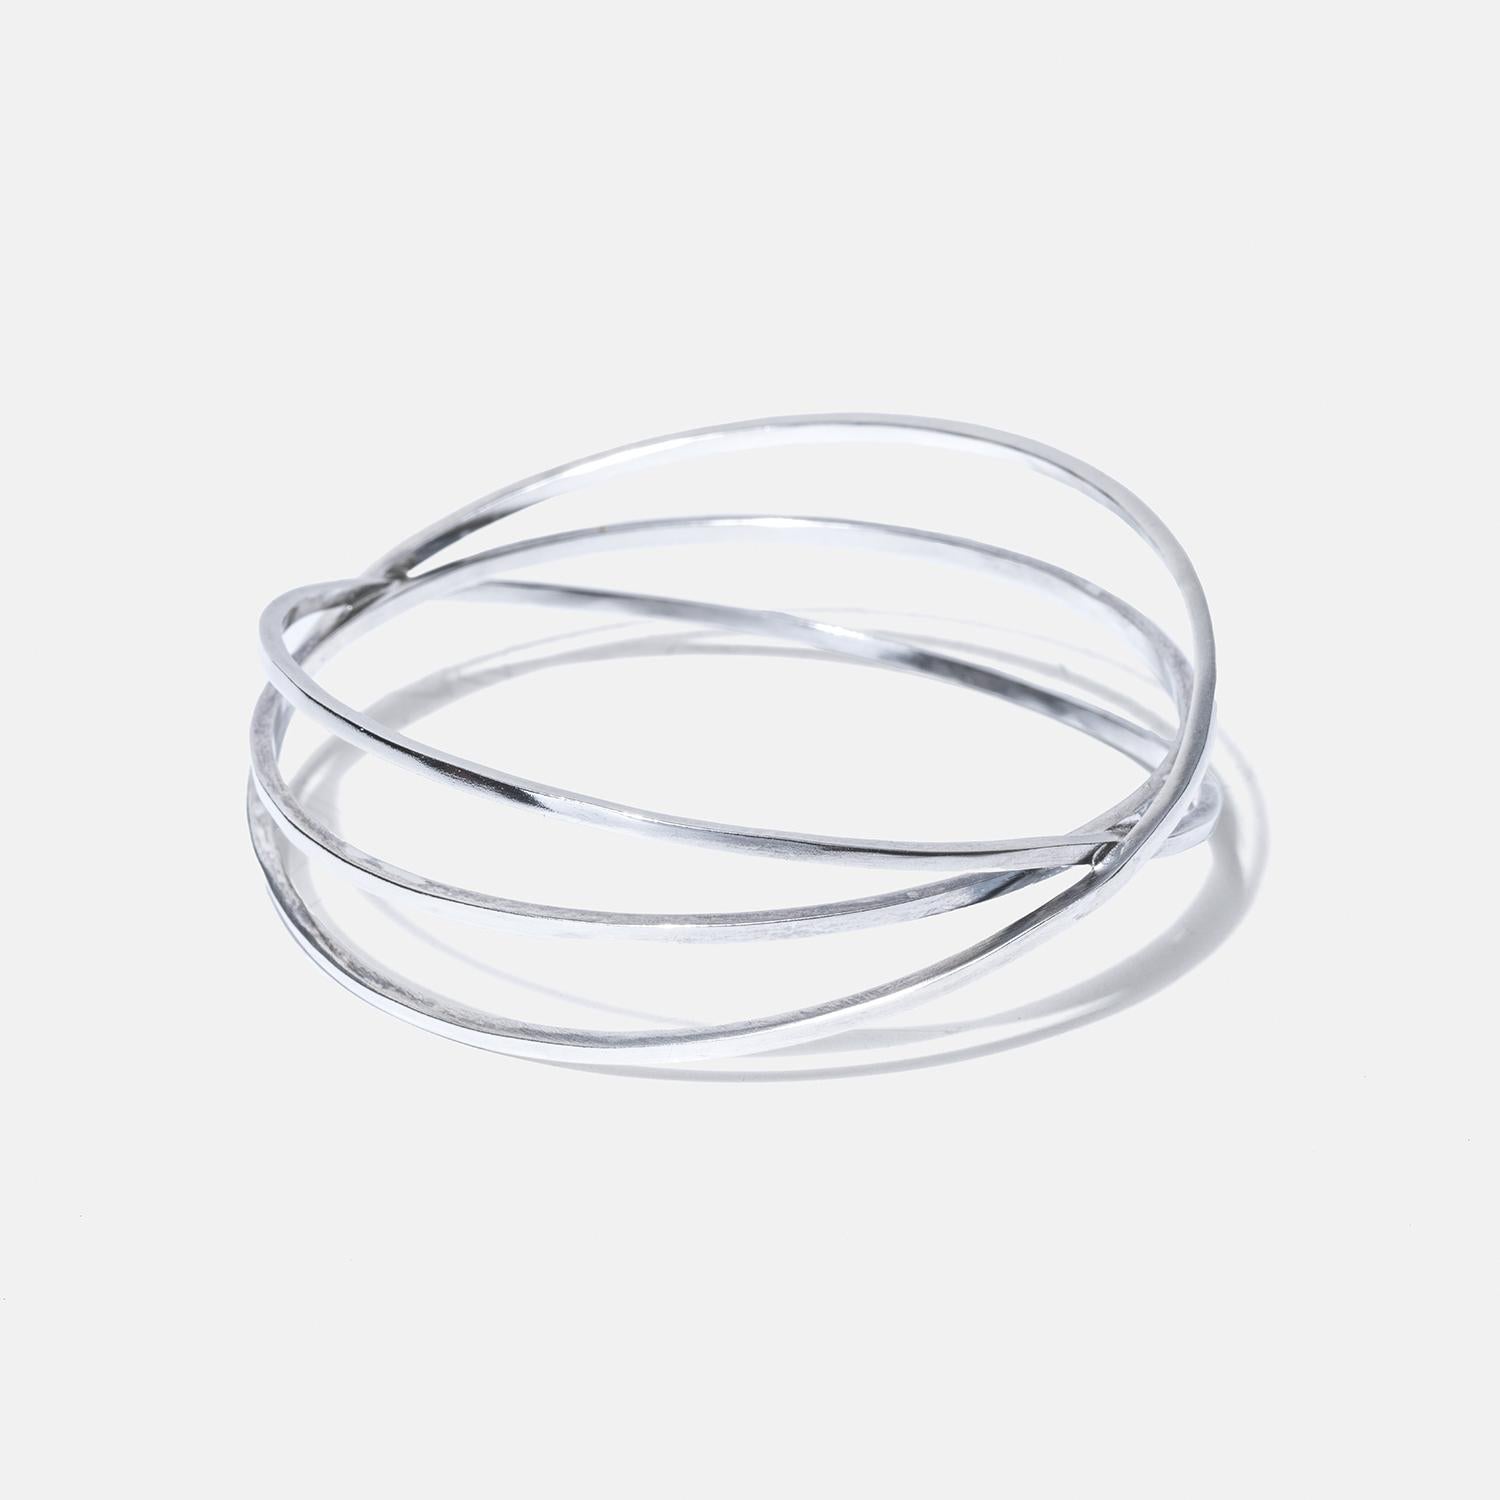 This sterling silver cuff bracelet elegantly consists of three interconnected slim circular bands, creating a harmonious, layered look. Each band is polished to a high shine, reflecting light beautifully and emphasizing its sleek, modern design. The